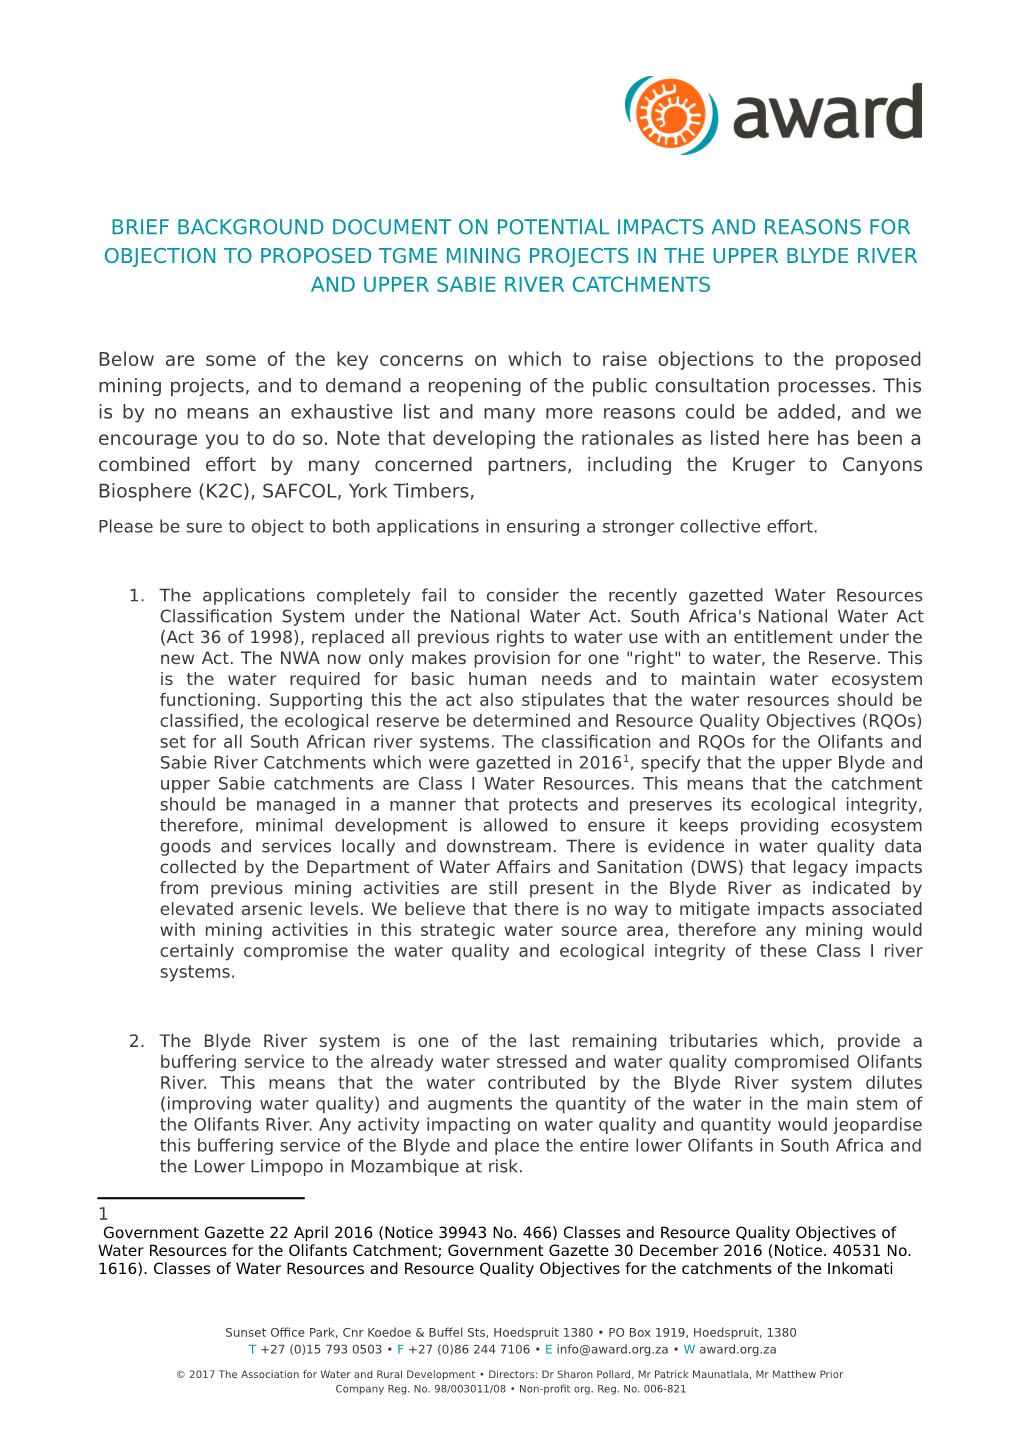 Brief Background Document on Potential Impacts and Reasons for Objection to Proposed Tgme Mining Projects in the Upper Blyde River and Upper Sabie River Catchments